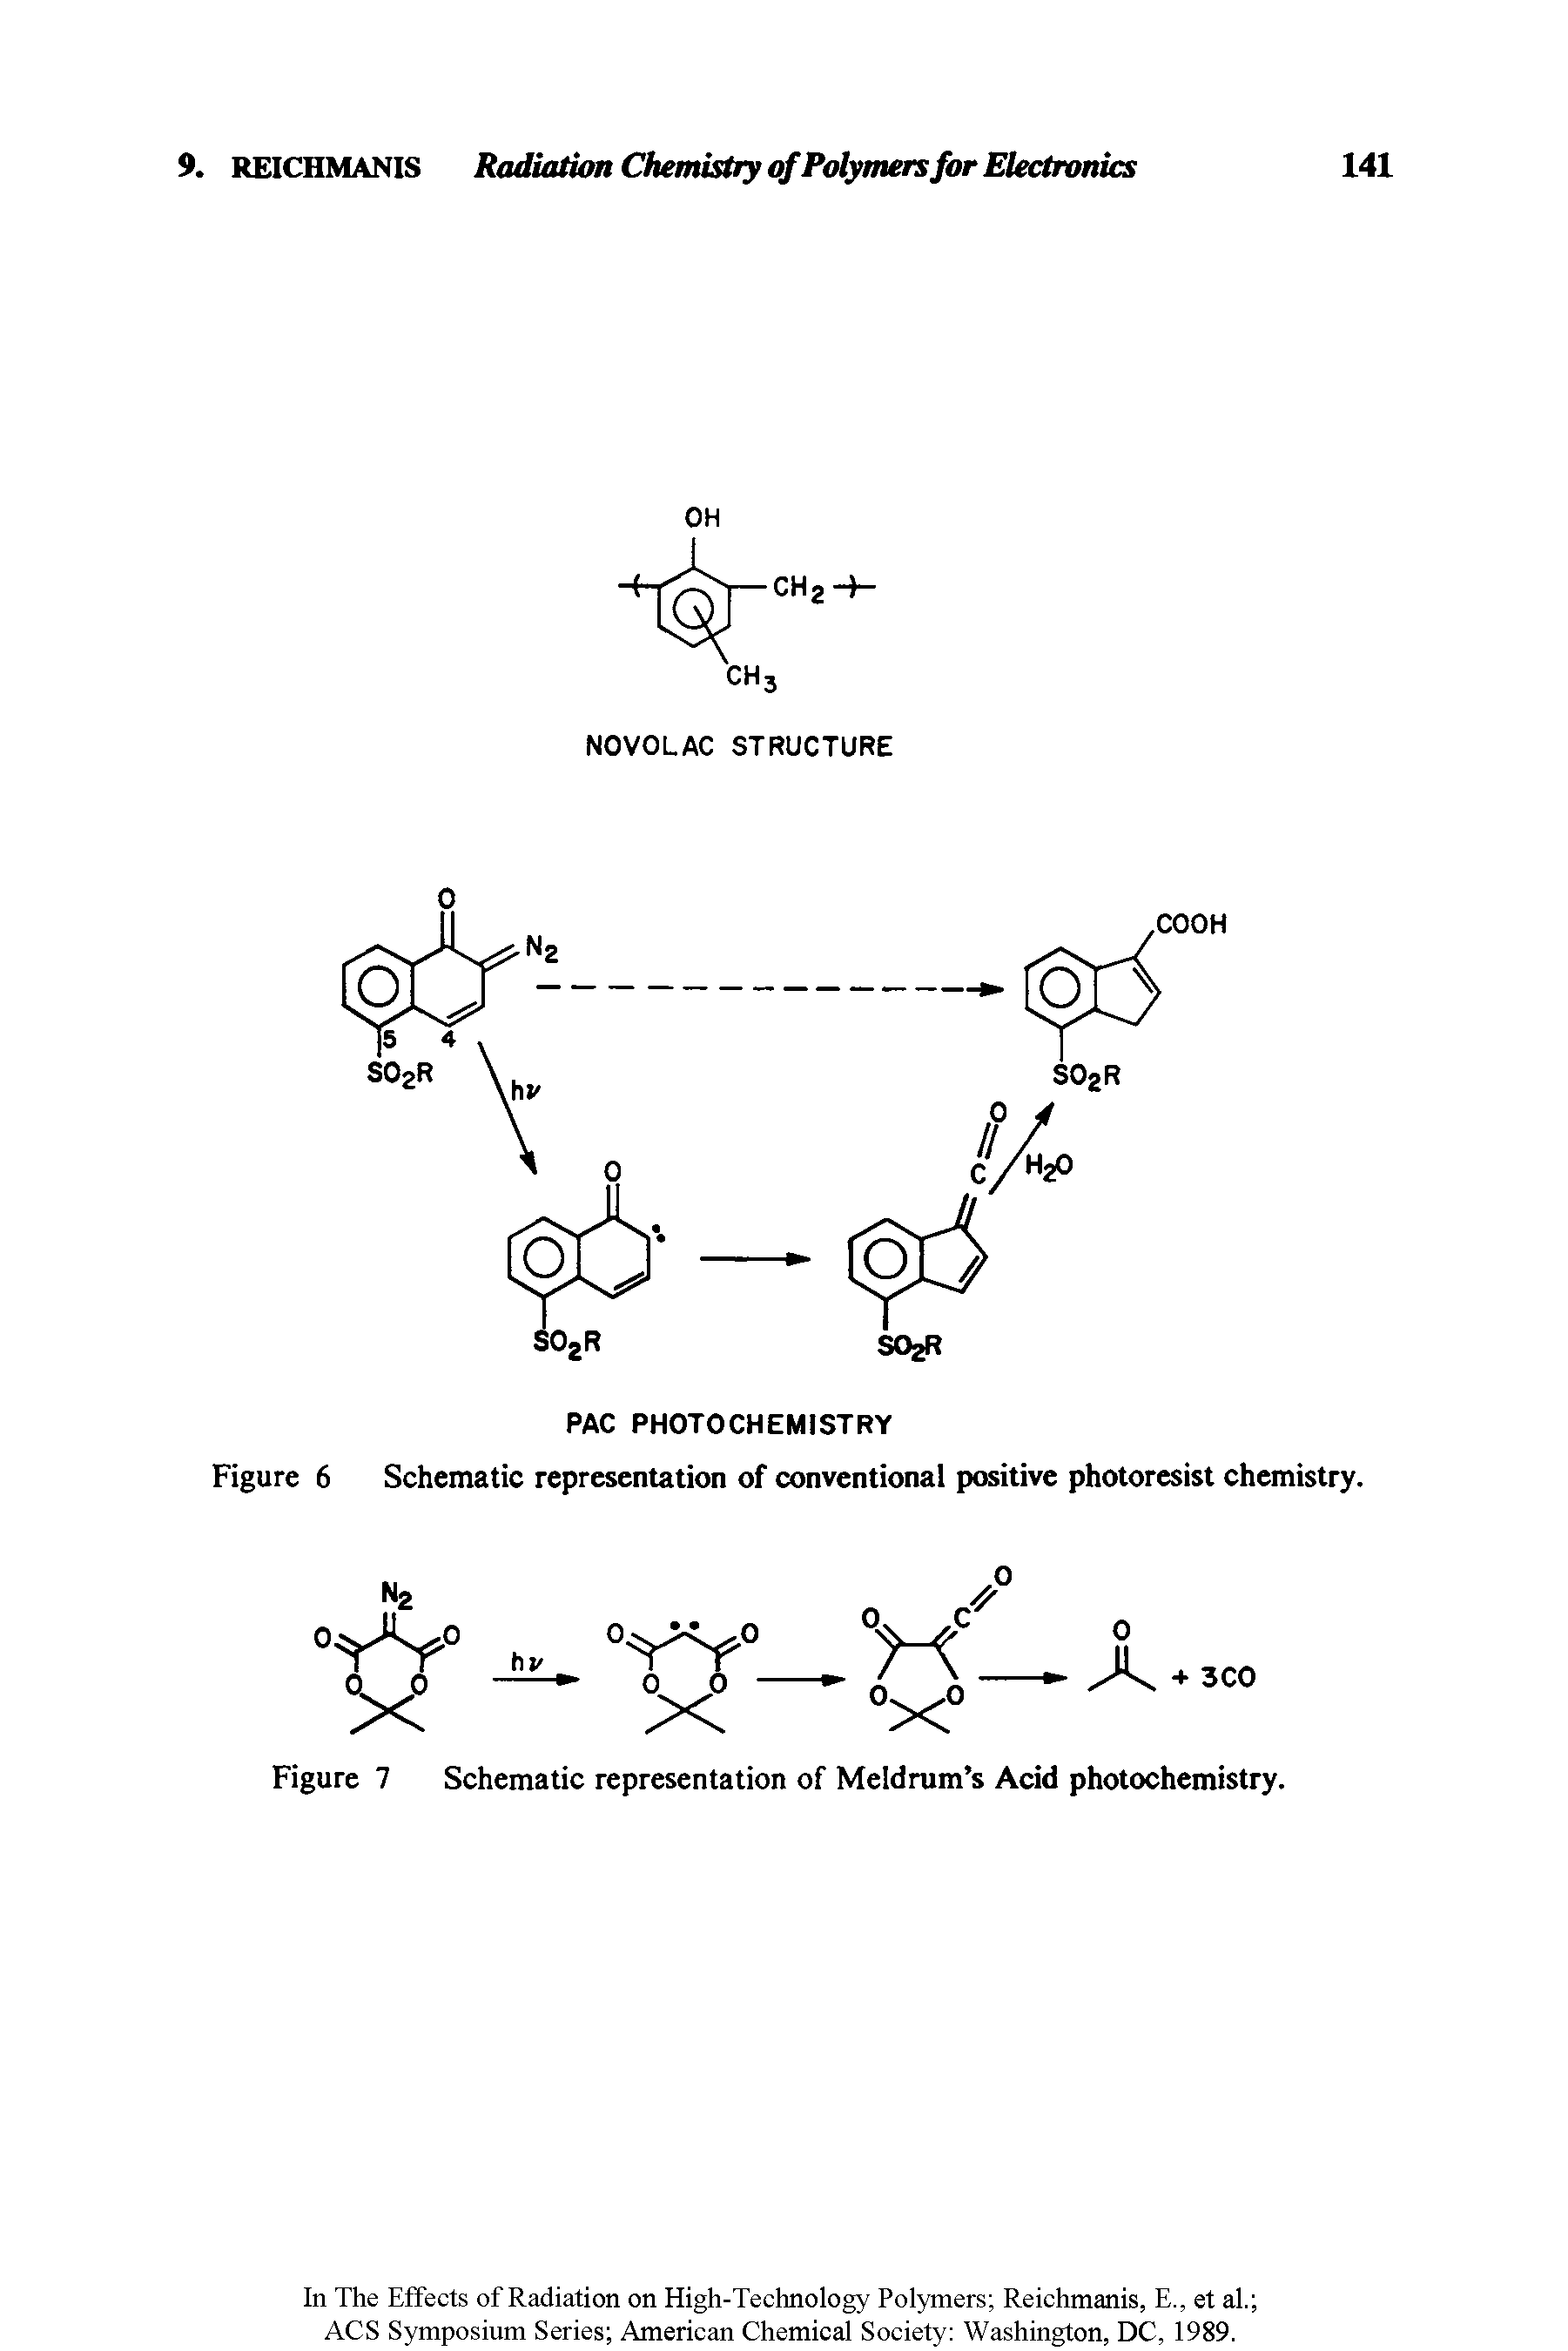 Figure 6 Schematic representation of conventional positive photoresist chemistry.